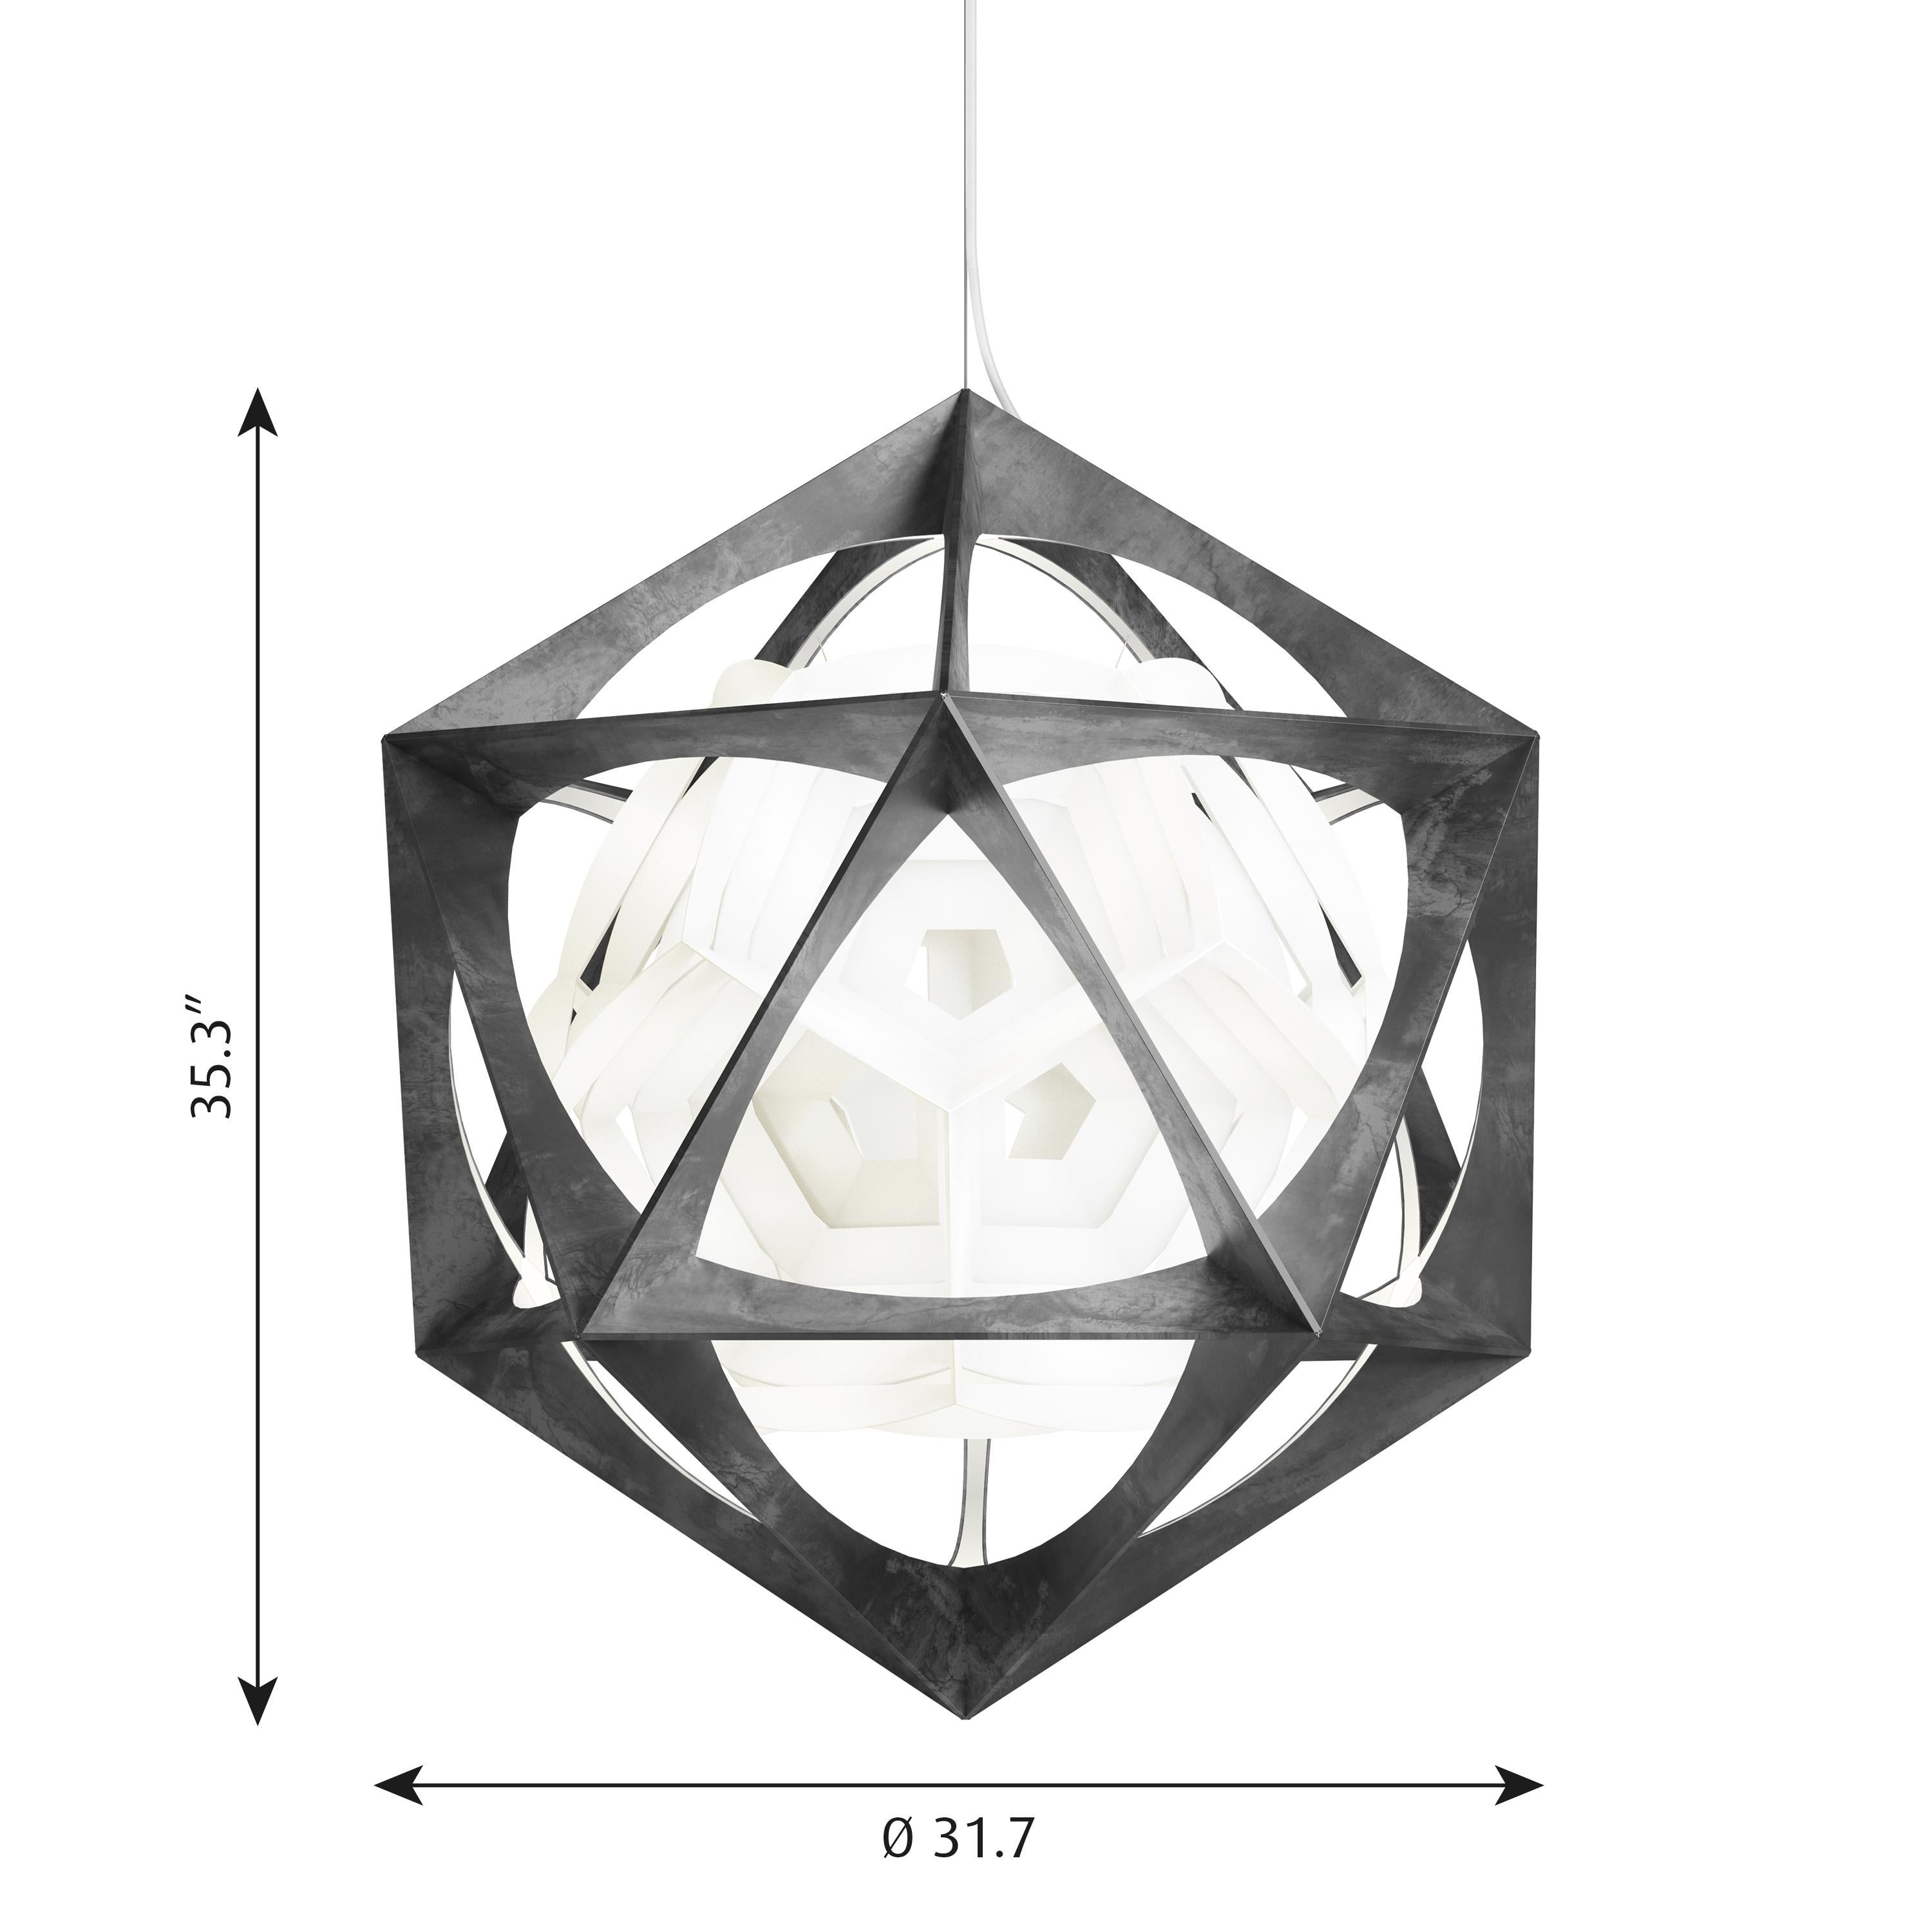 Monumental 'Oe Quasi Light' by Olafur Eliasson for Louis Poulsen. The chandelier has simple but complex interlayering of geometric shapes that may occur in nature. The exterior aluminum frame is an icosahedron shape with 12 LEDs embedded in the